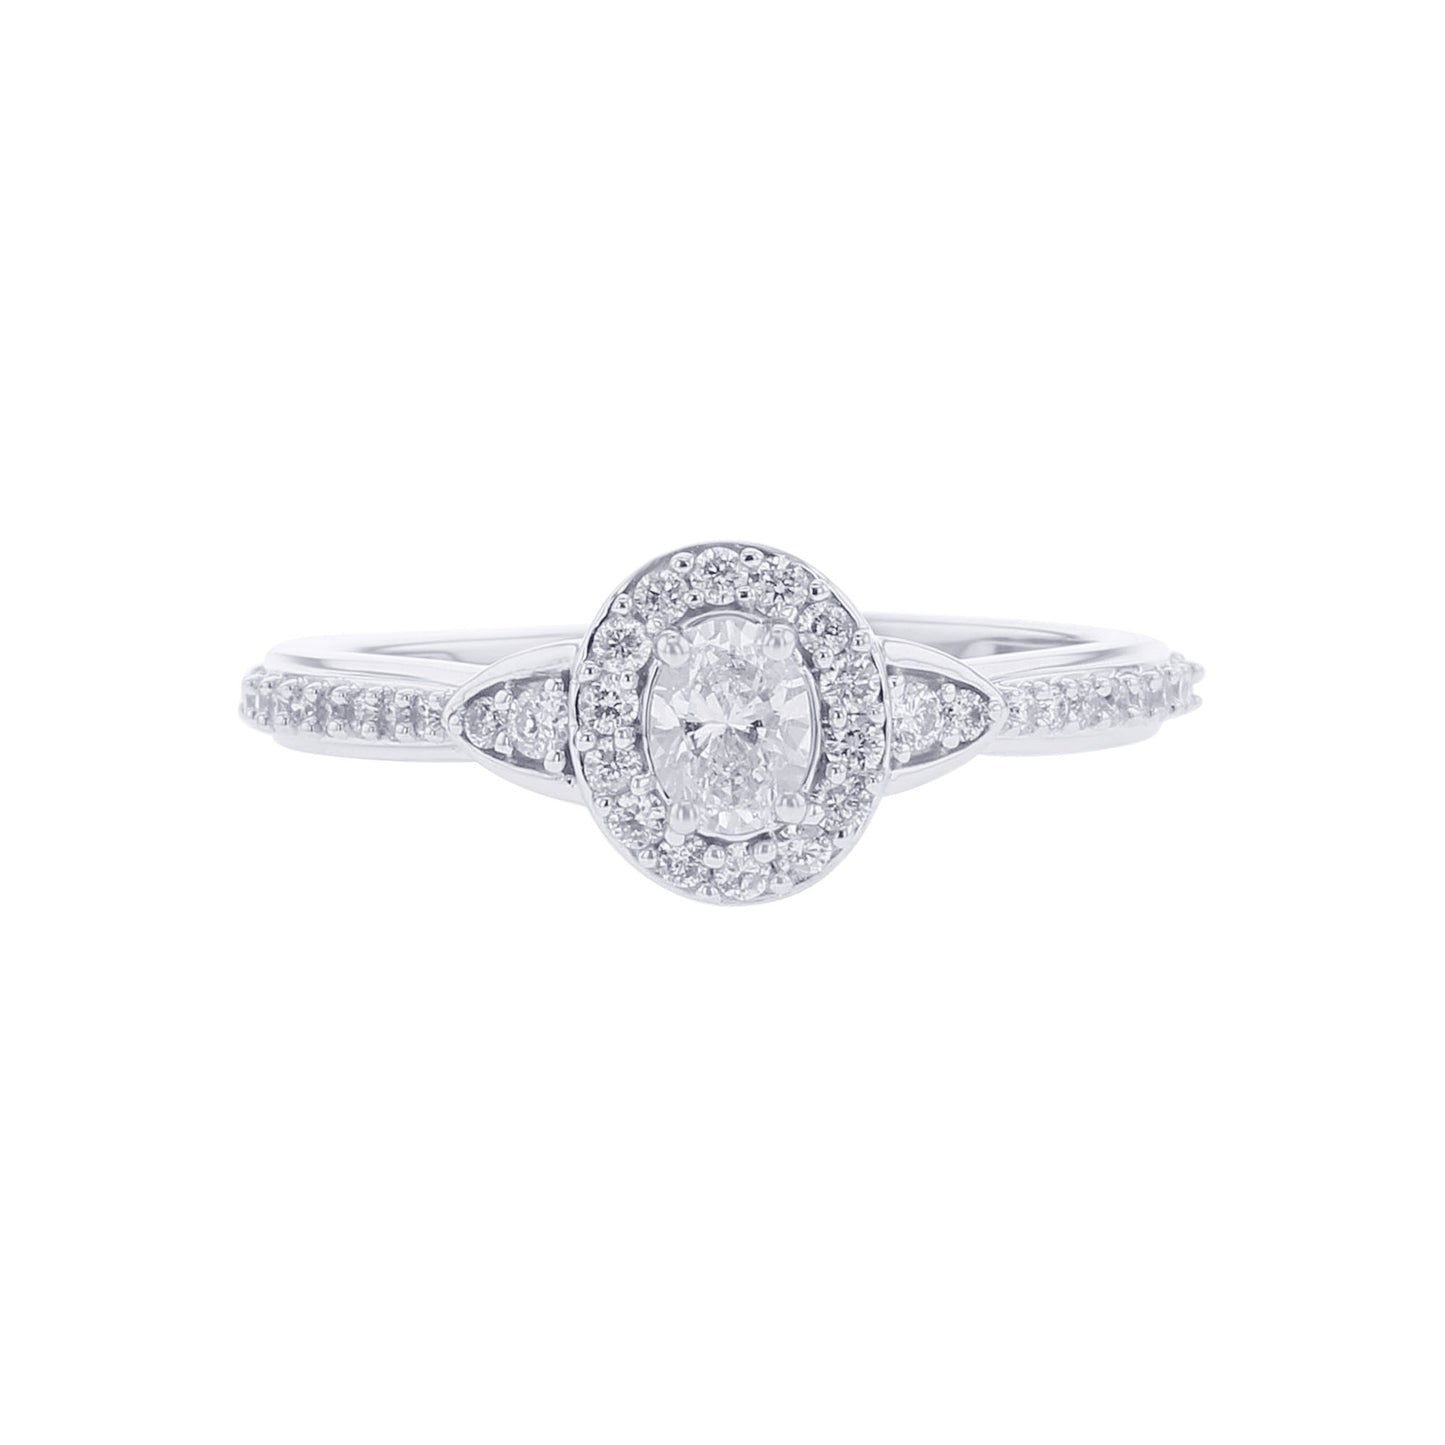 Paola Oval Halo Ready for Love Diamond Engagement Ring